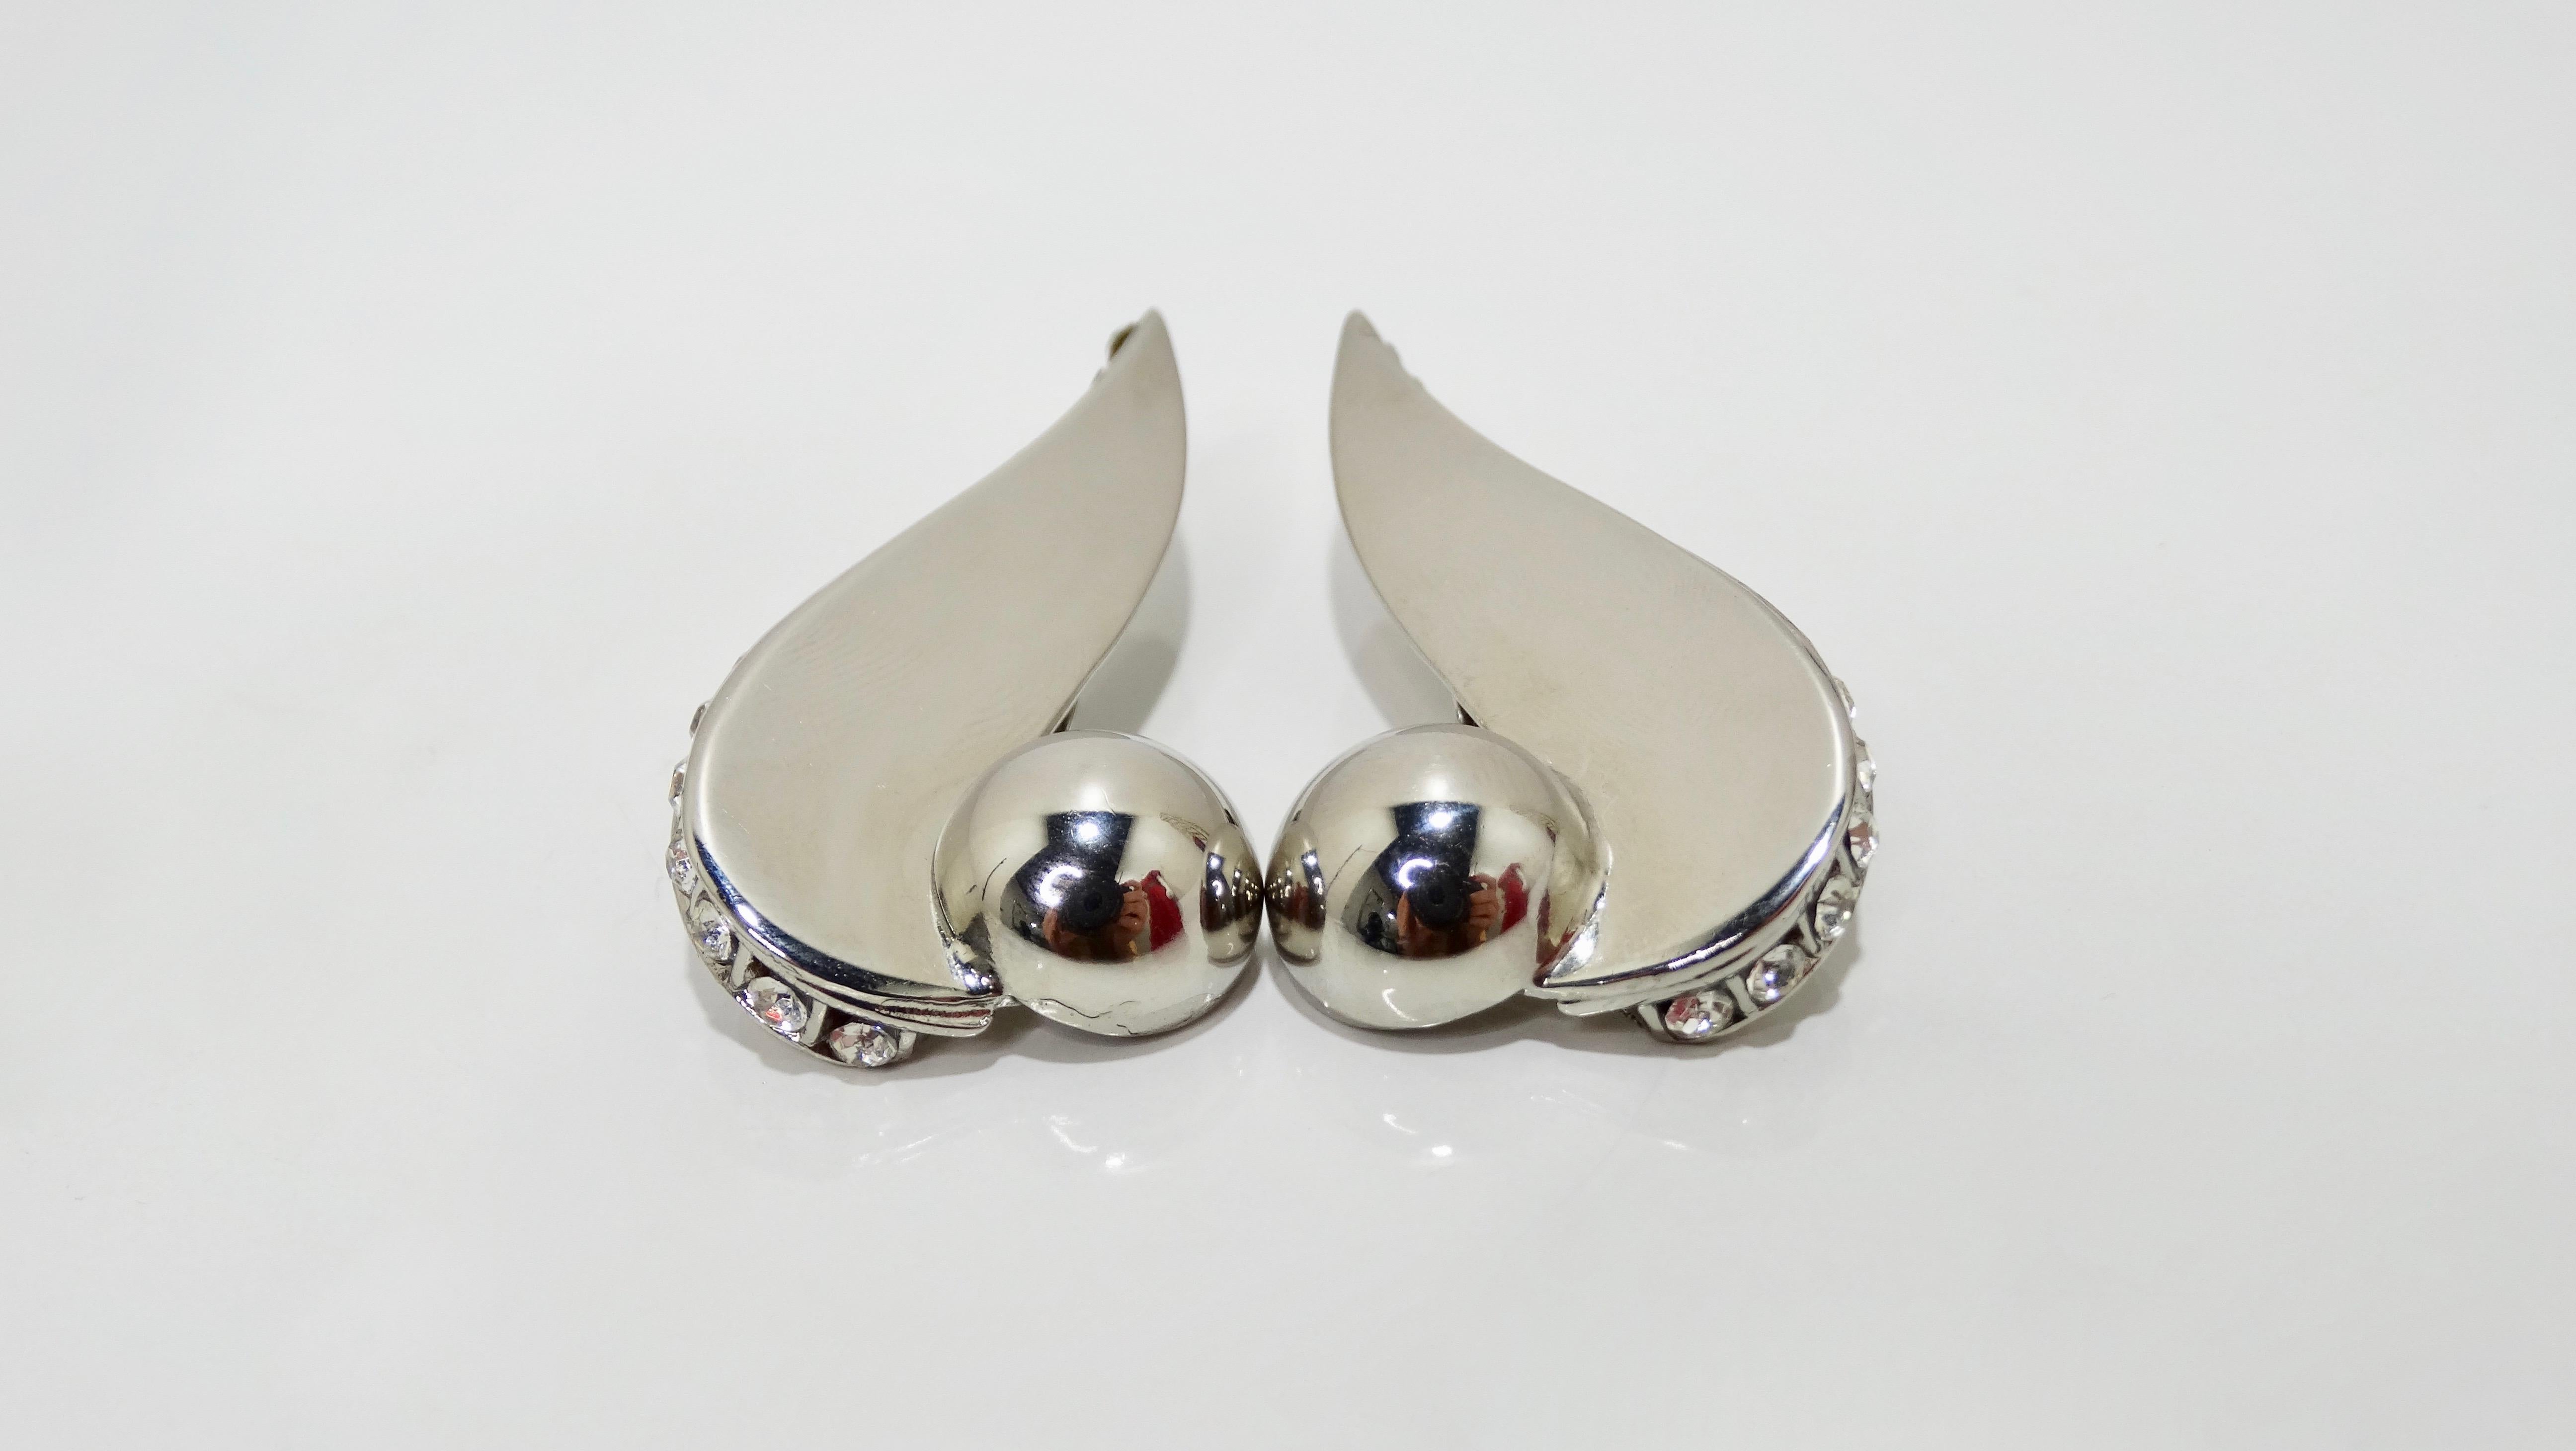 Get some Versace in your life! Circa 1980s, these silver tone earrings are the product of Ugo Correani who worked alongside Gianni Versace to create costume jewelry. They feature a geometric shape with a rhinestone embellished trim and clip-on